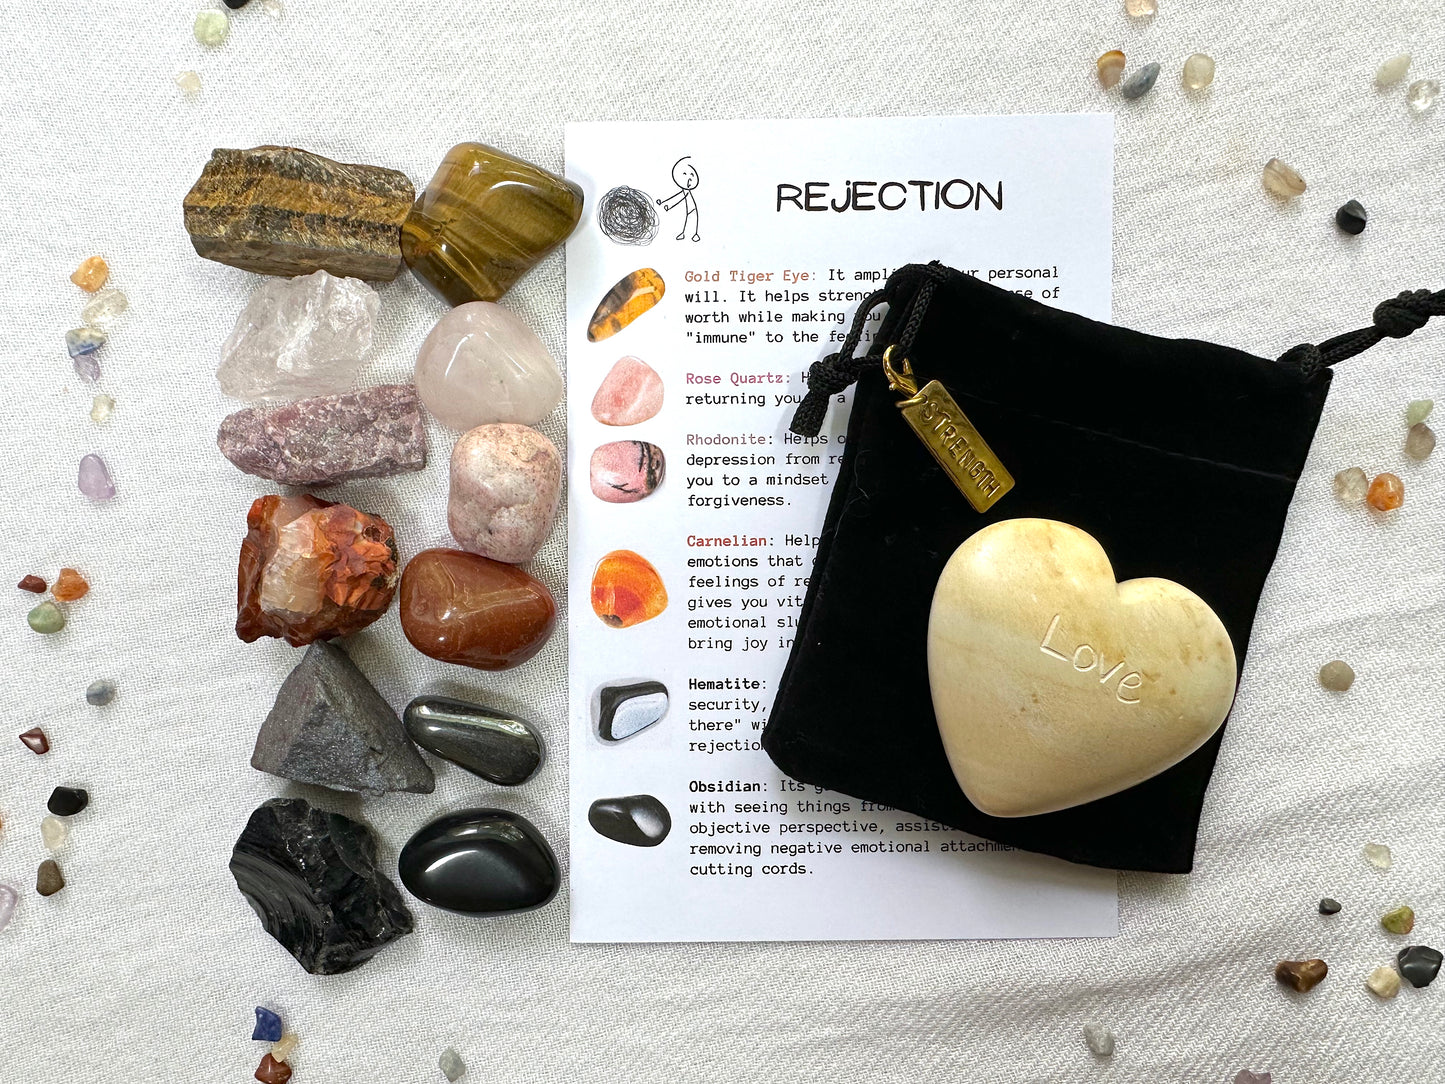 In Case of Rejection Crystal Set and Palm Stone